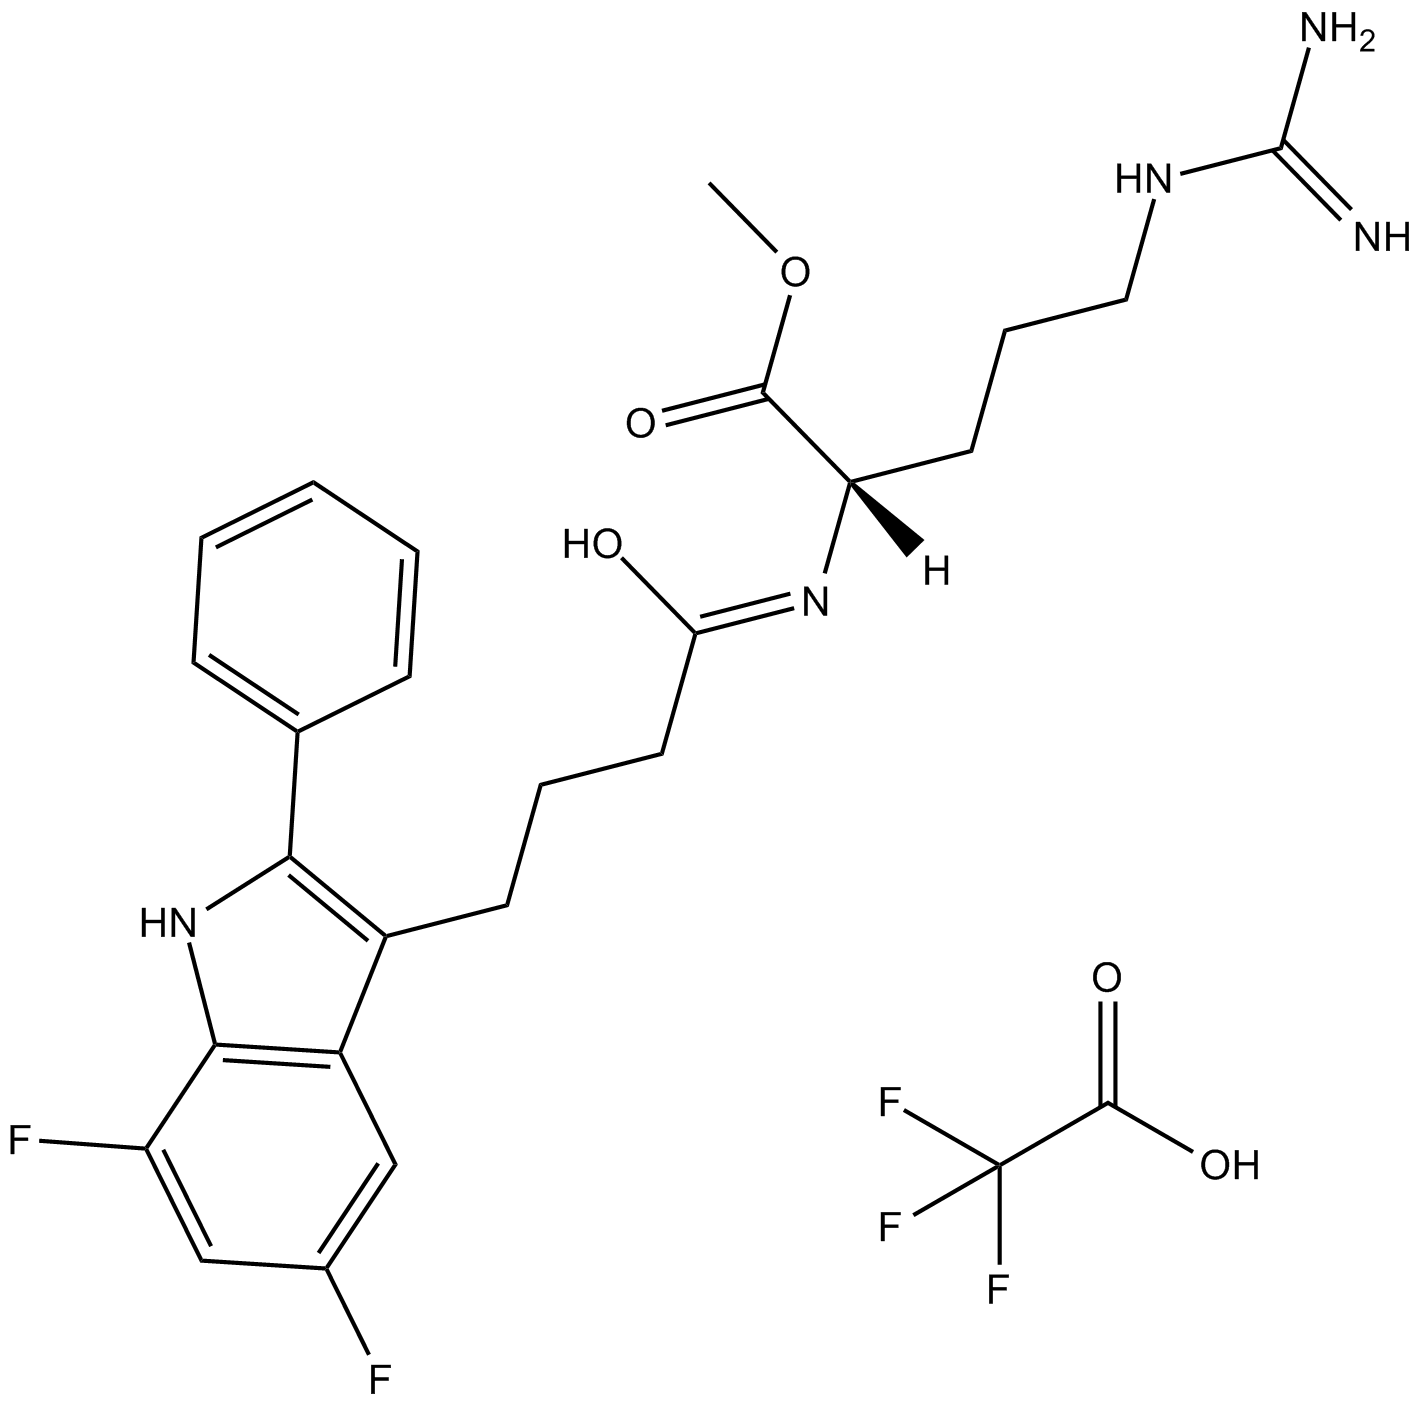 L-803,087 trifluoroacetate  Chemical Structure